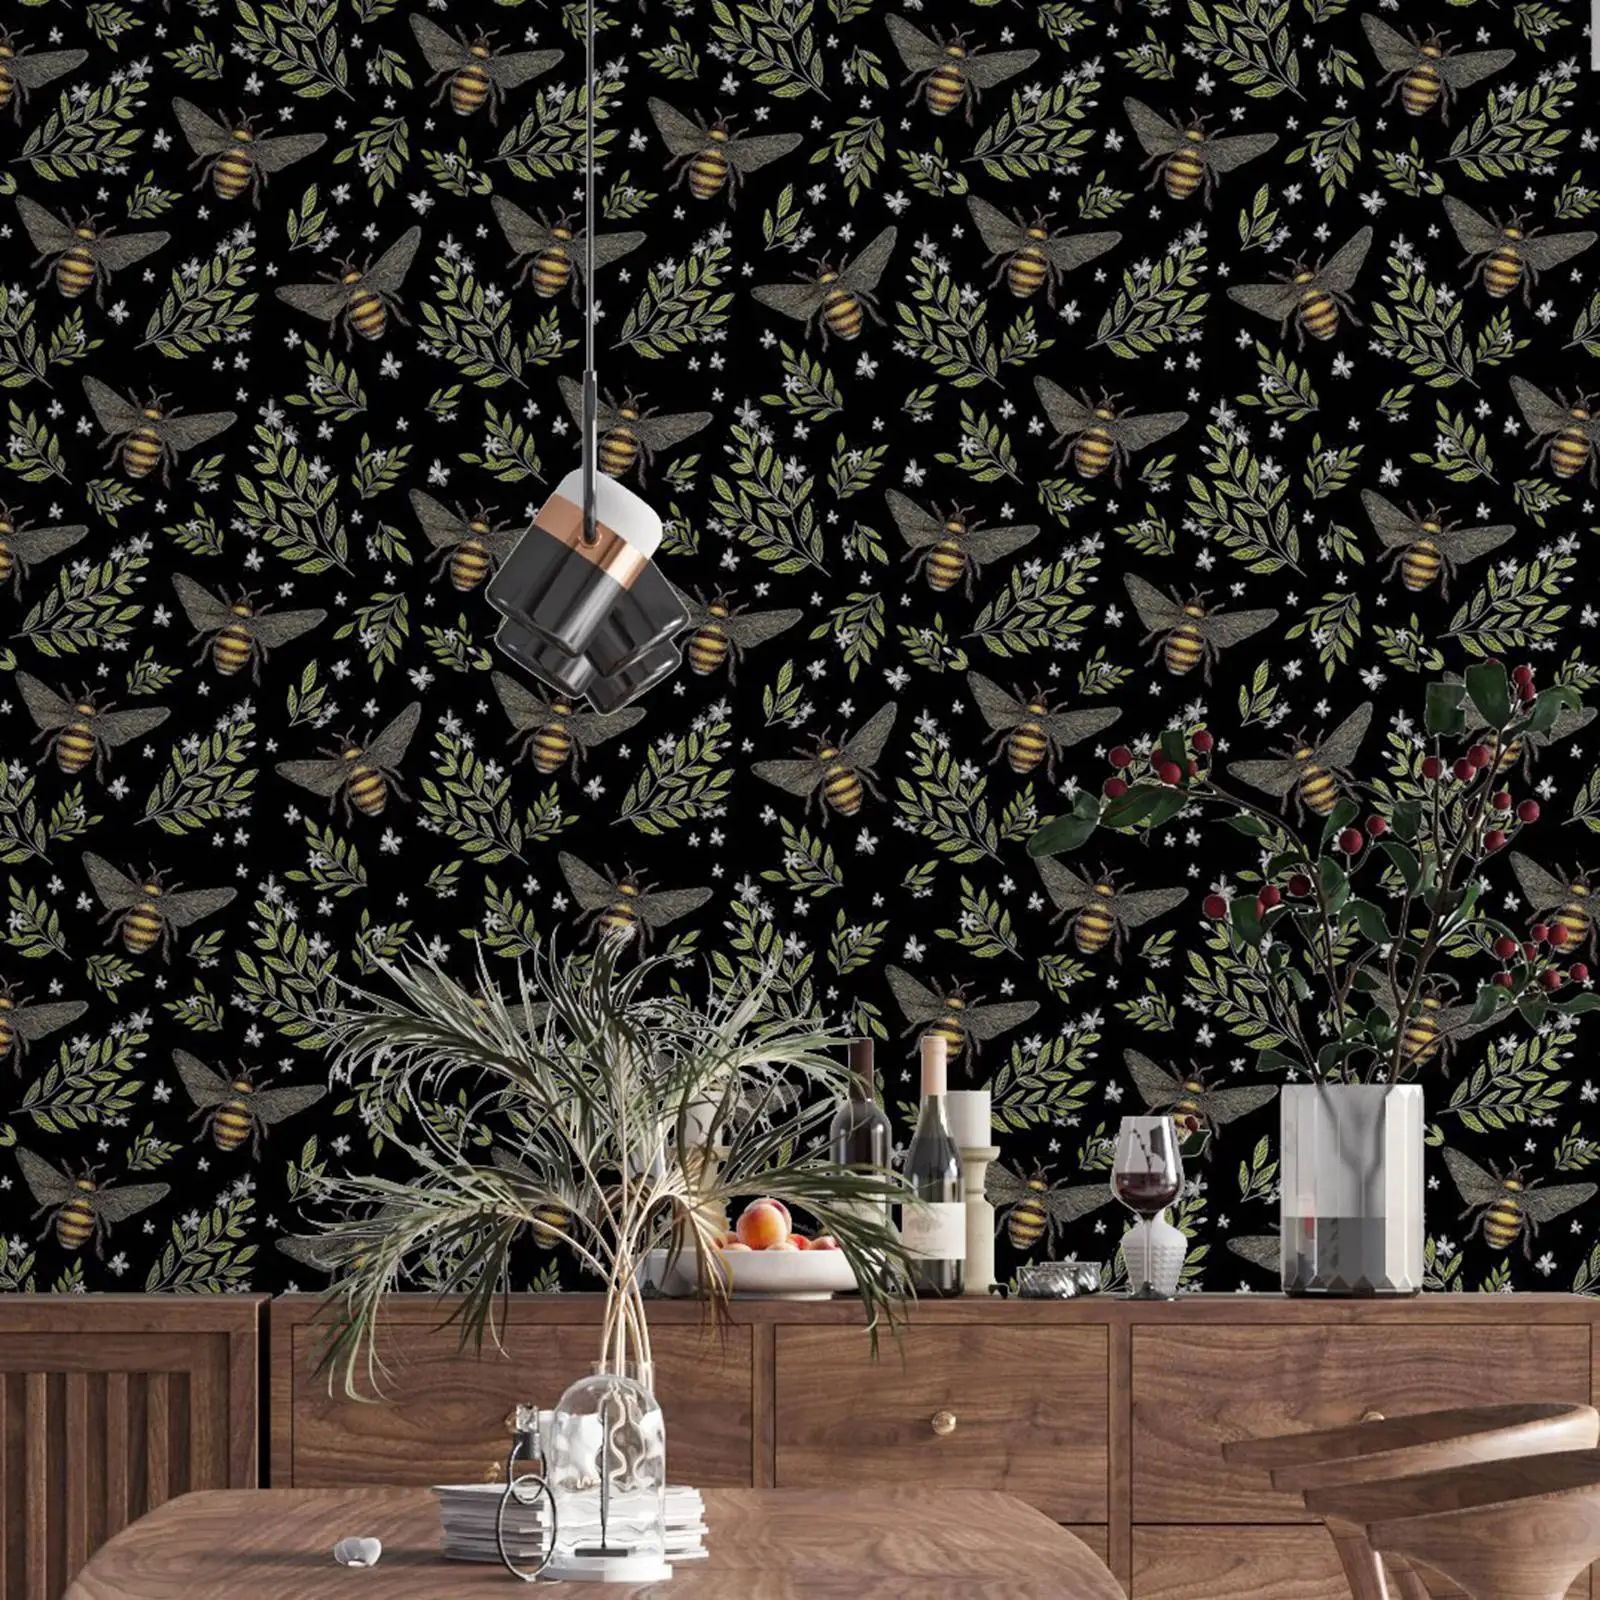 Spring Bee Removable Wallpaper in Midnight Black, Honey Bee Wall Paper in black back ground for living room bedroom HB0624001 умные часы amazfit gtr mini a2174 midnight black